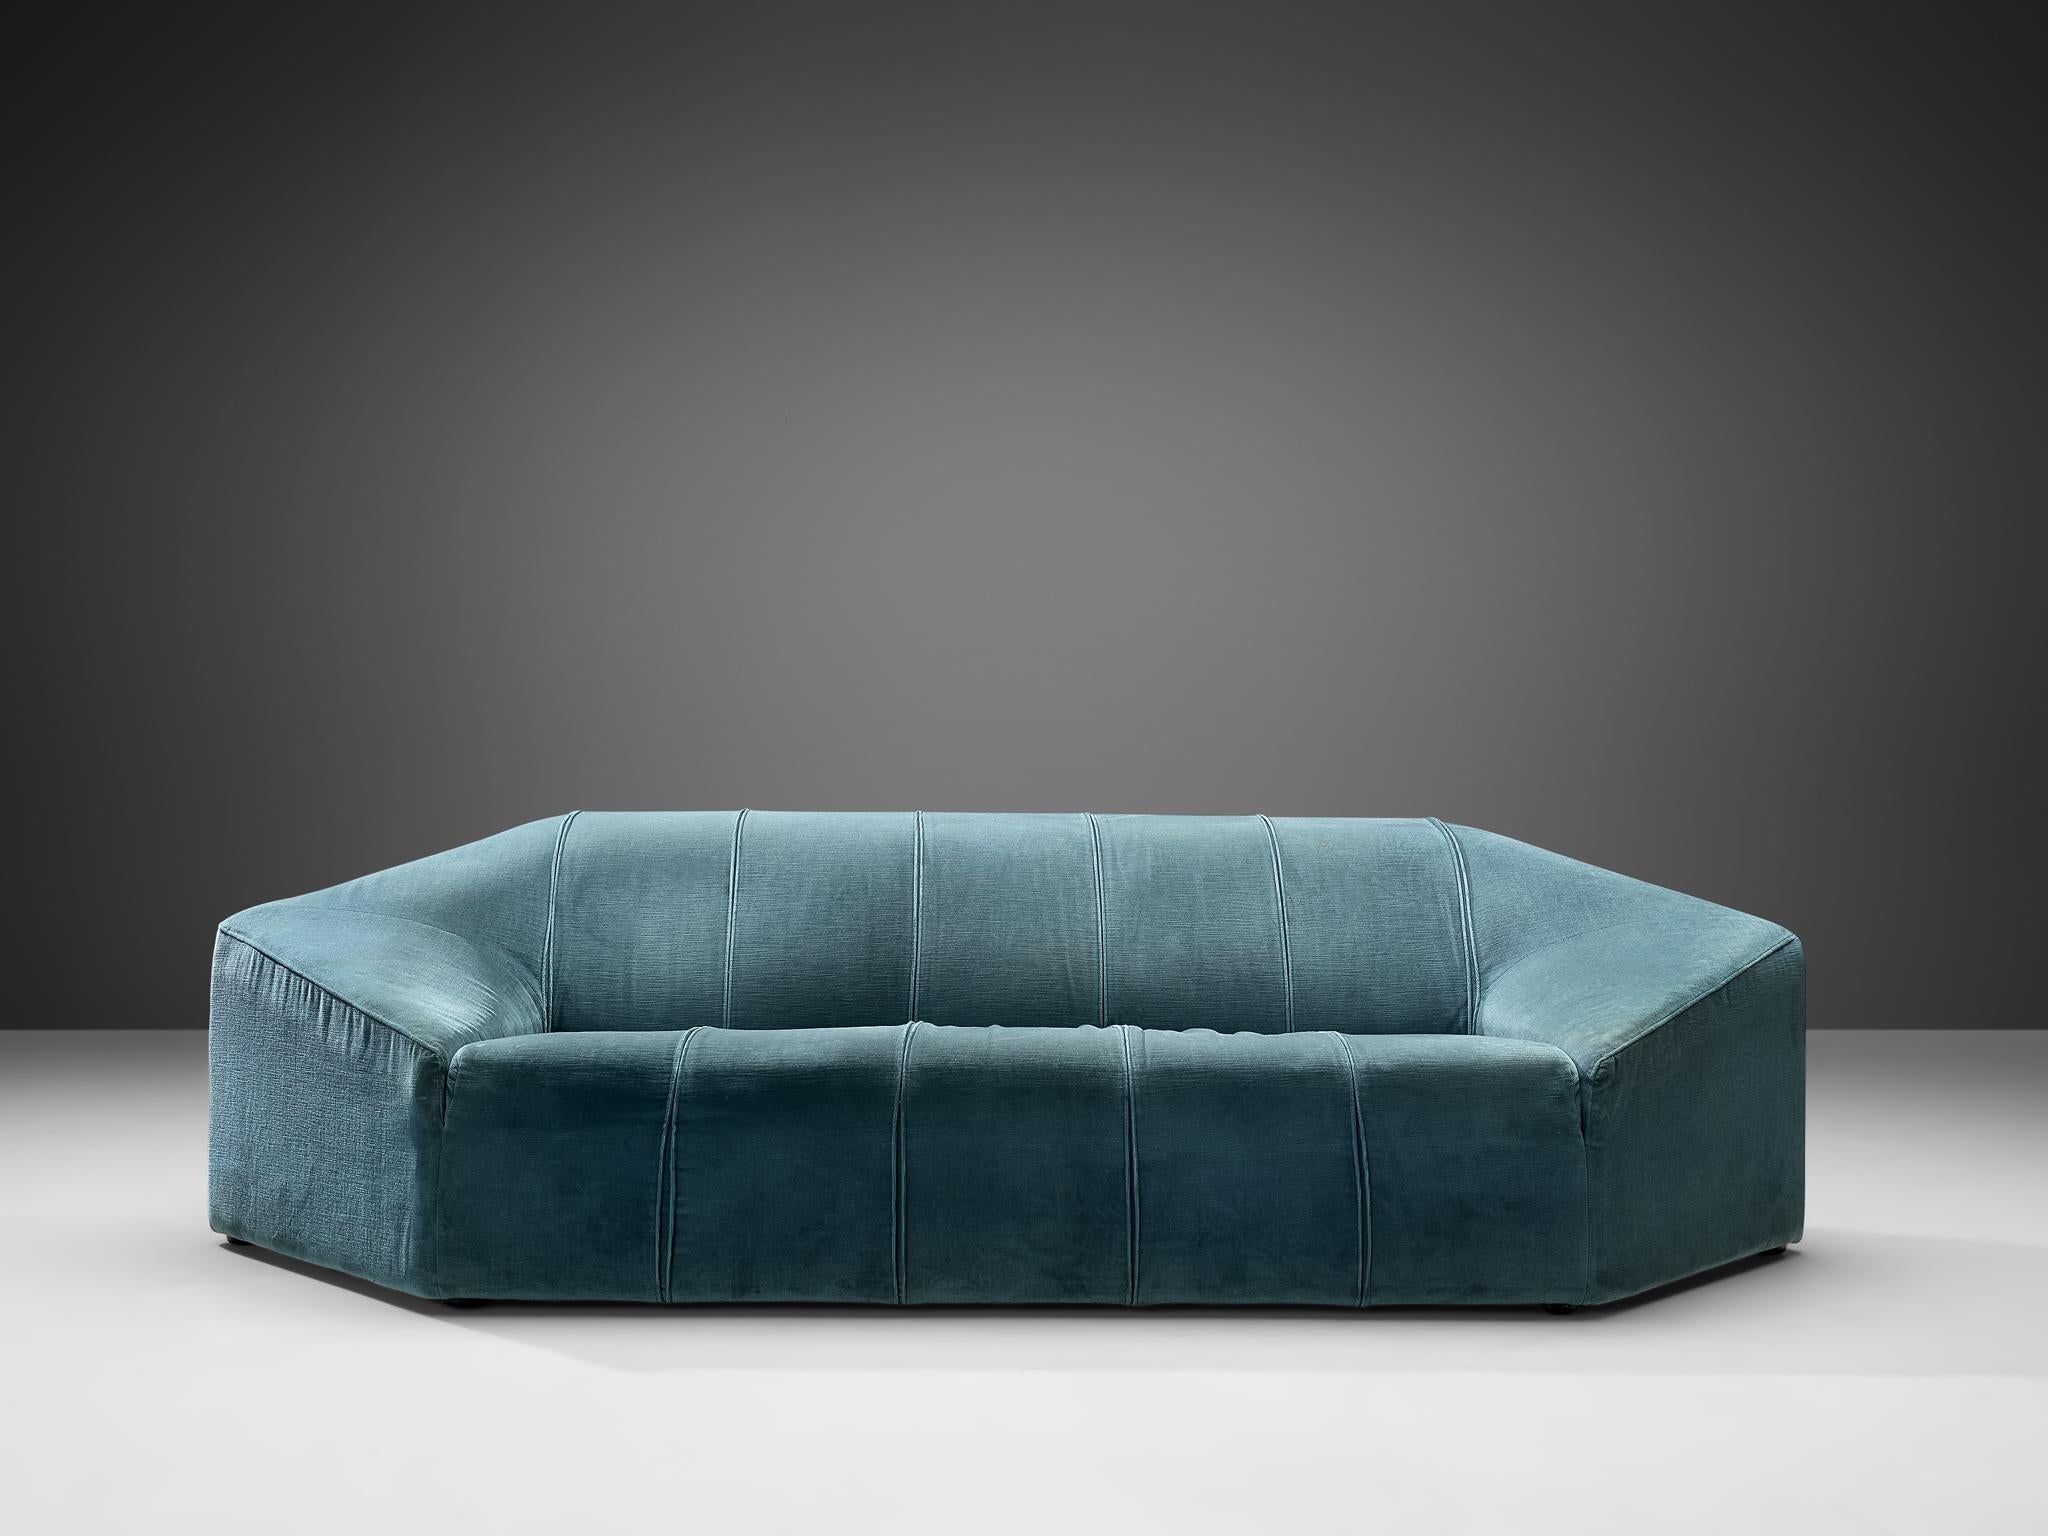 Three-seat sofa, acquamarine velour upholstery, Italy, 1960s

Extravagant sofa in spectacular hexagonal shape. The Italian sofa has a solid base of which the backrest rises diagonally. This results in large and wide armrests and a thick backrest.